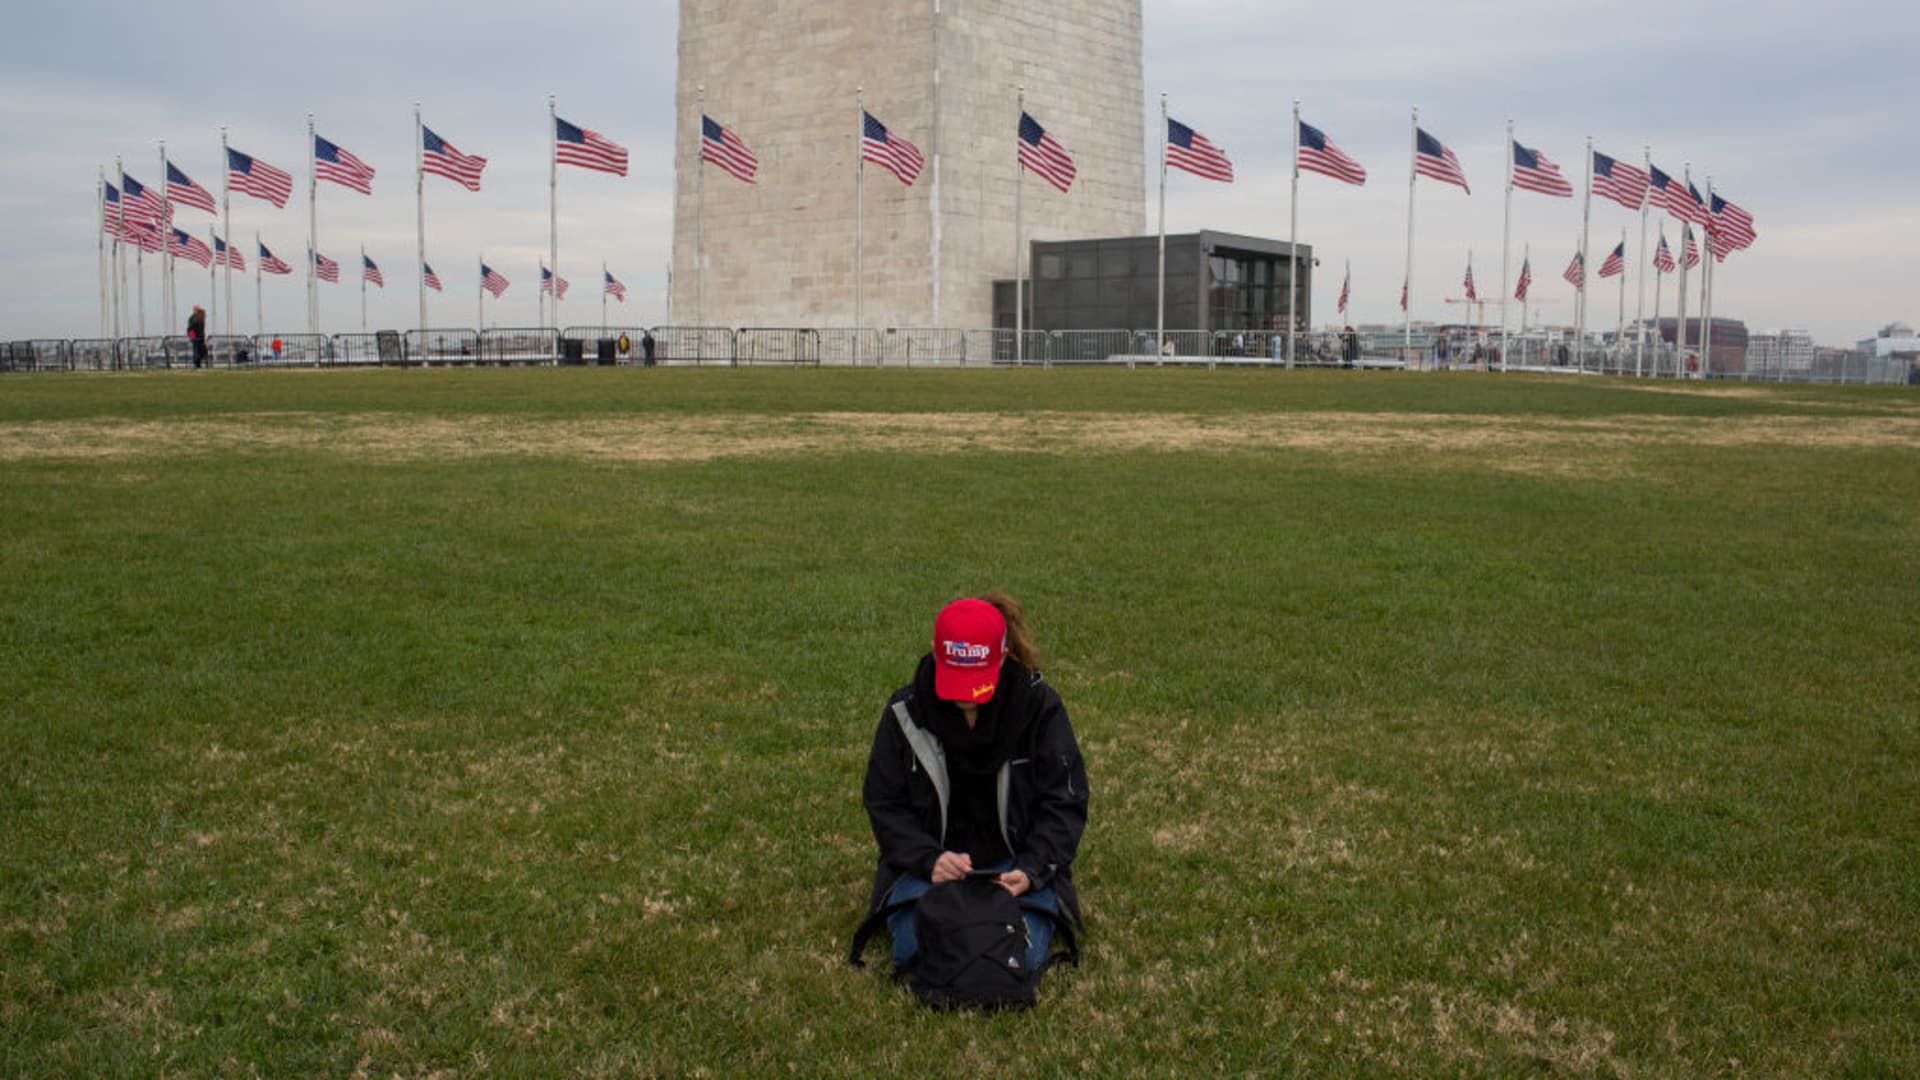 A lone Trump supporter rests on the National Mall in front of the Washington Monument at a sparsely attended rally demonstrating against the election results on December 12, 2020 in Washington, D.C.